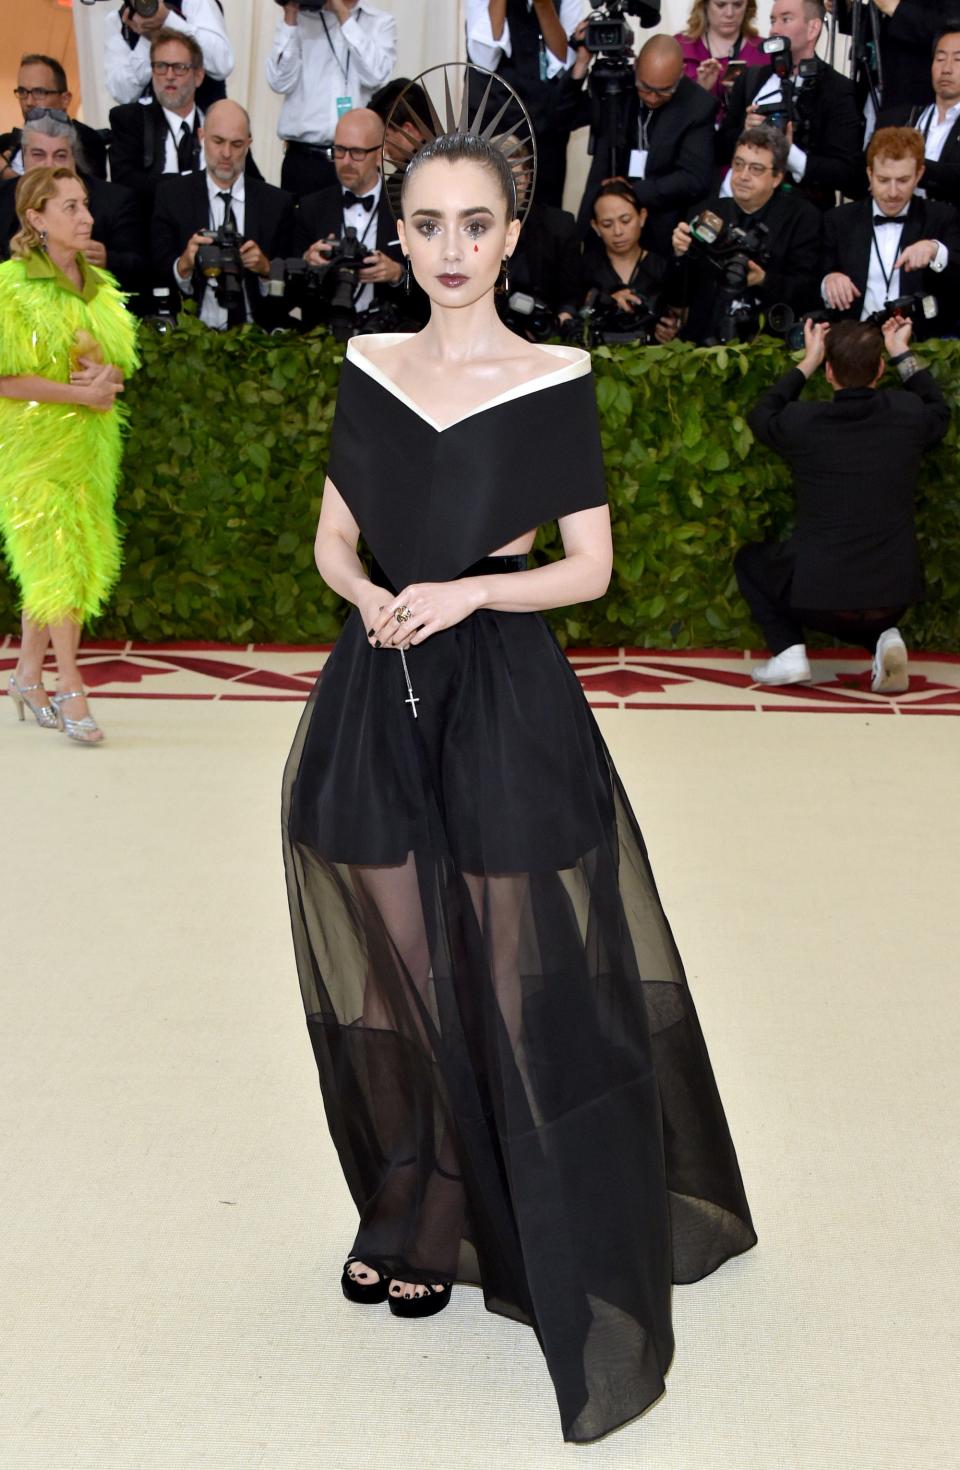 Lily Collins attends the 2018 Met Gala on May 7, 2018.